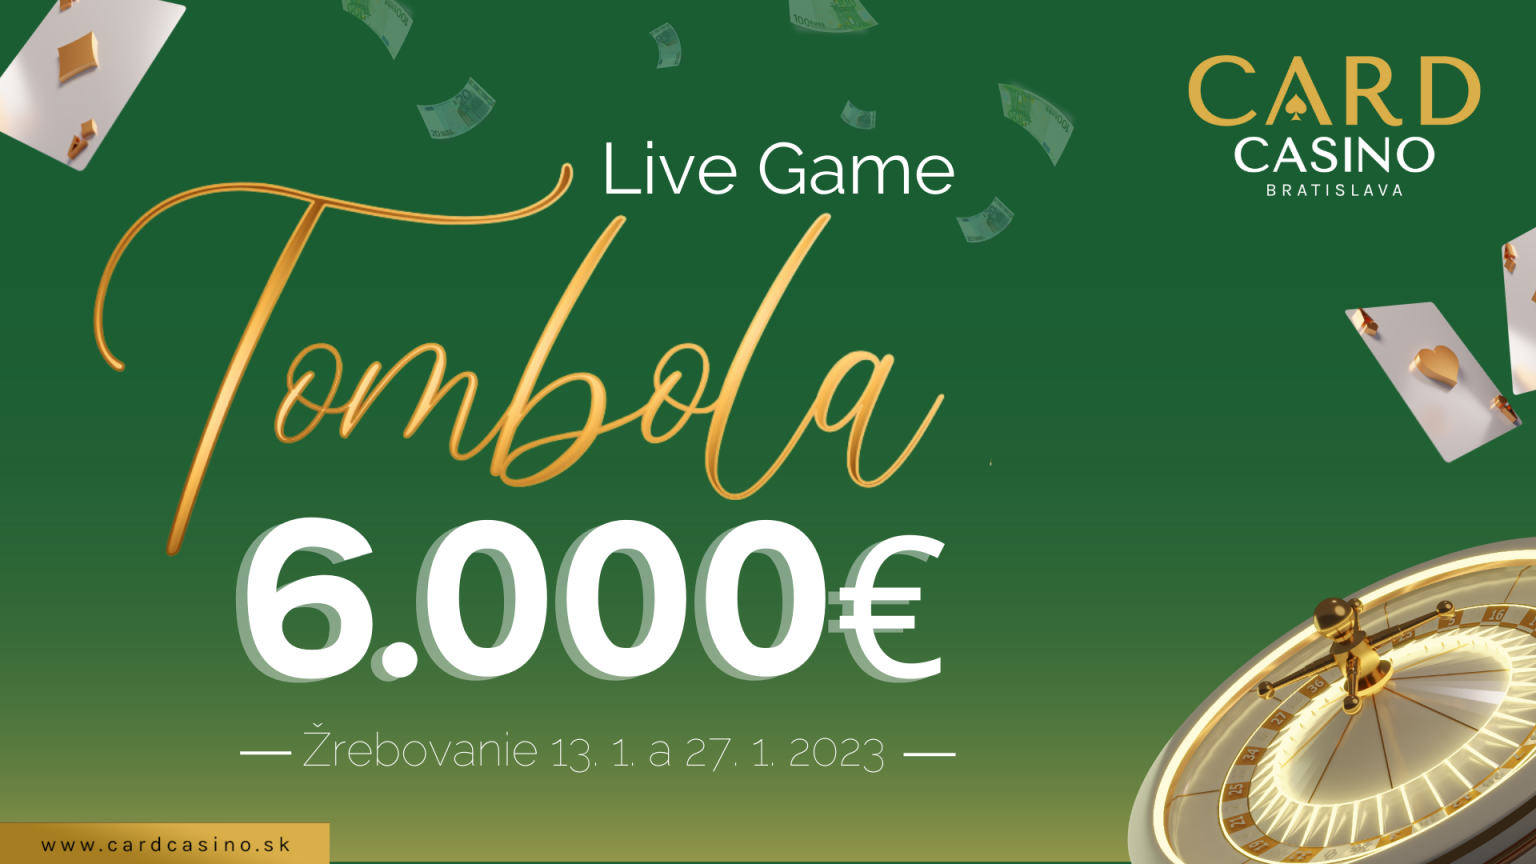 Get ready for the €6,000 Live Game Raffle